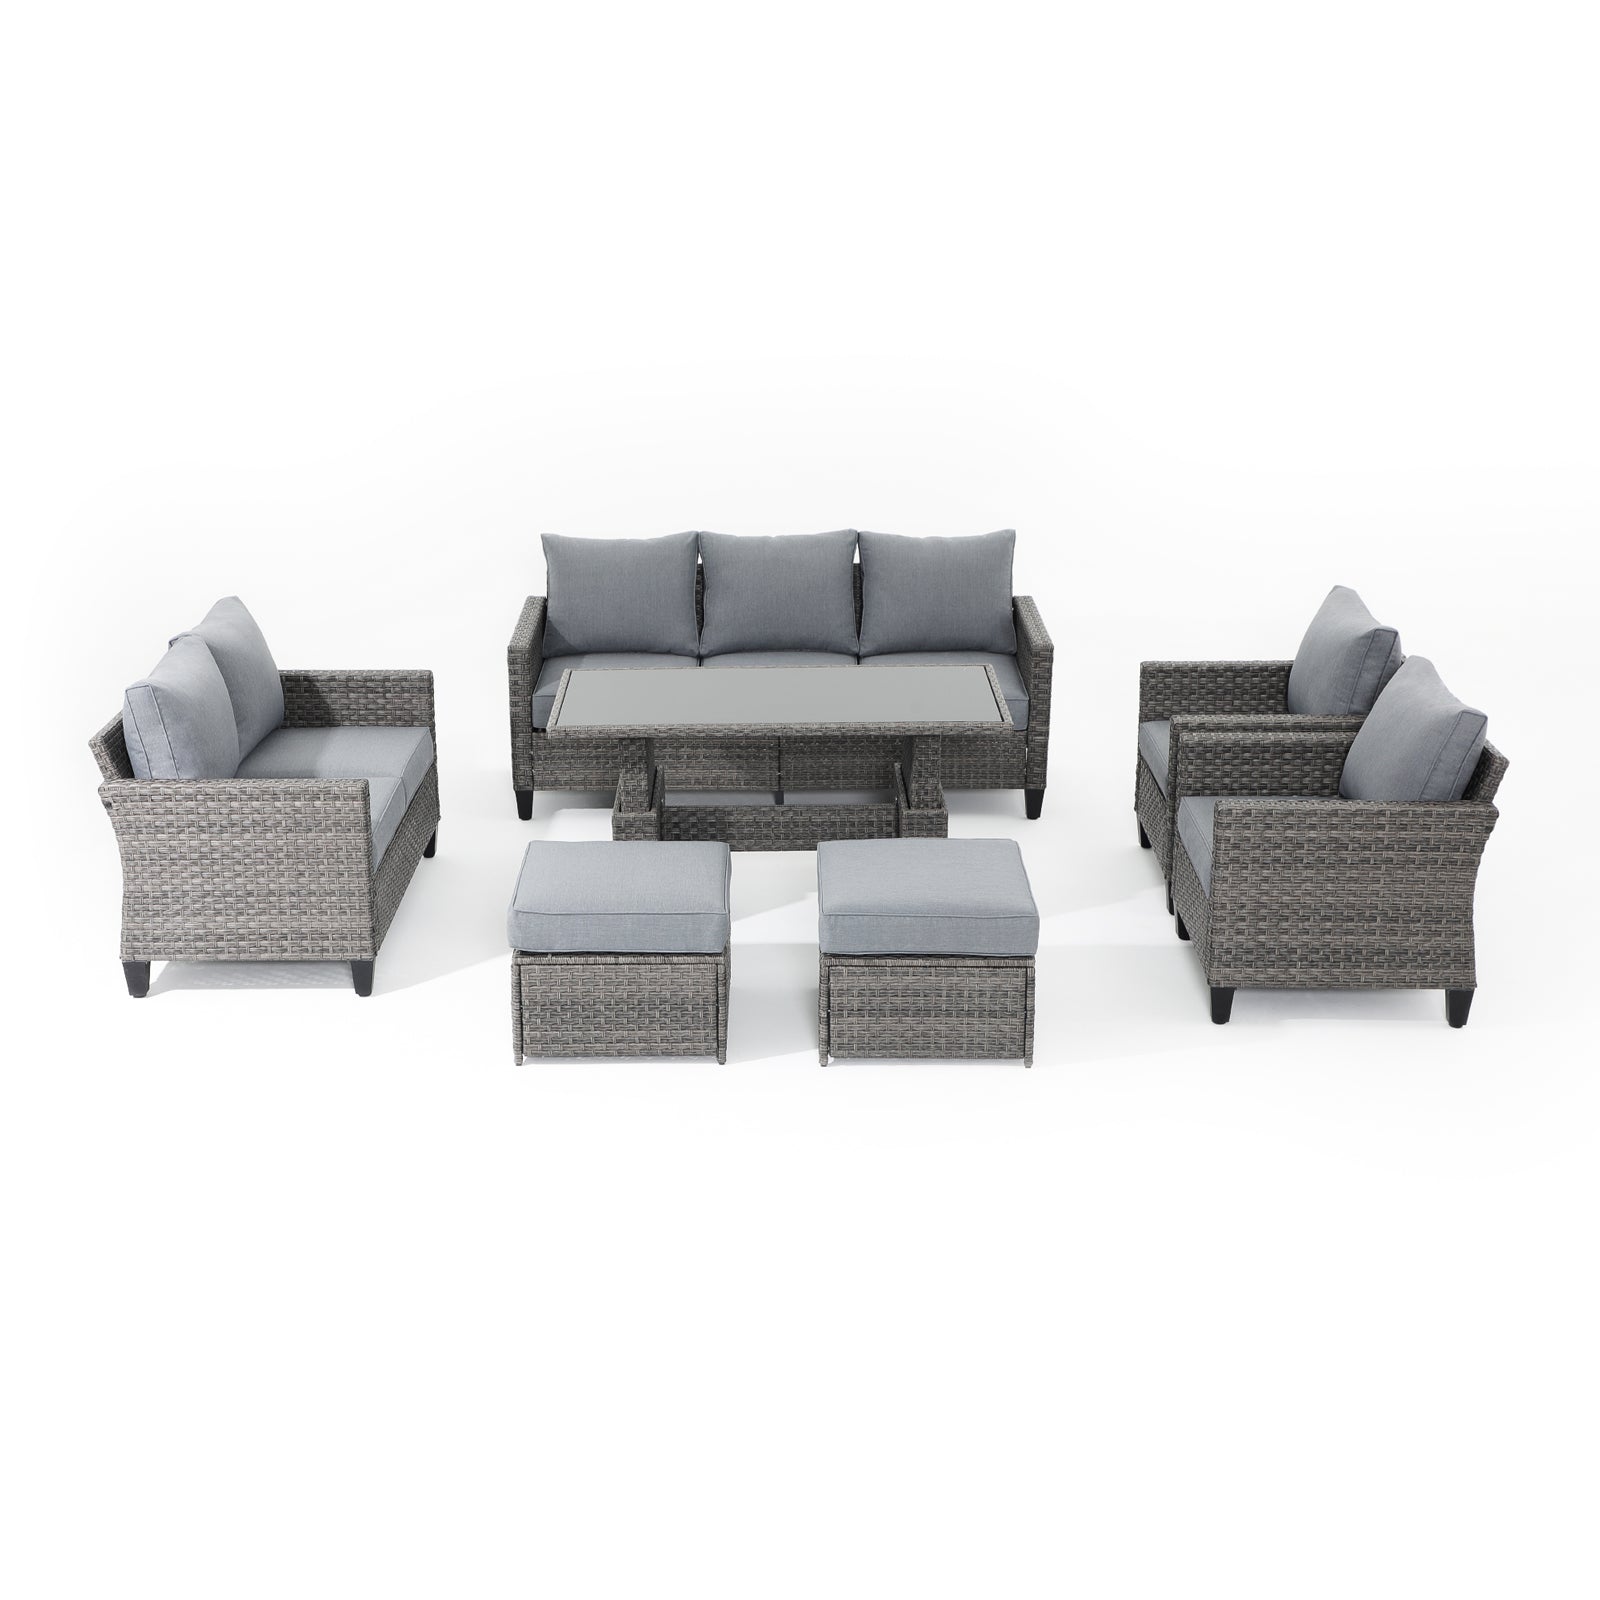 #Piece_7-pc#Color_Grey#Style_with Ottomans & Table